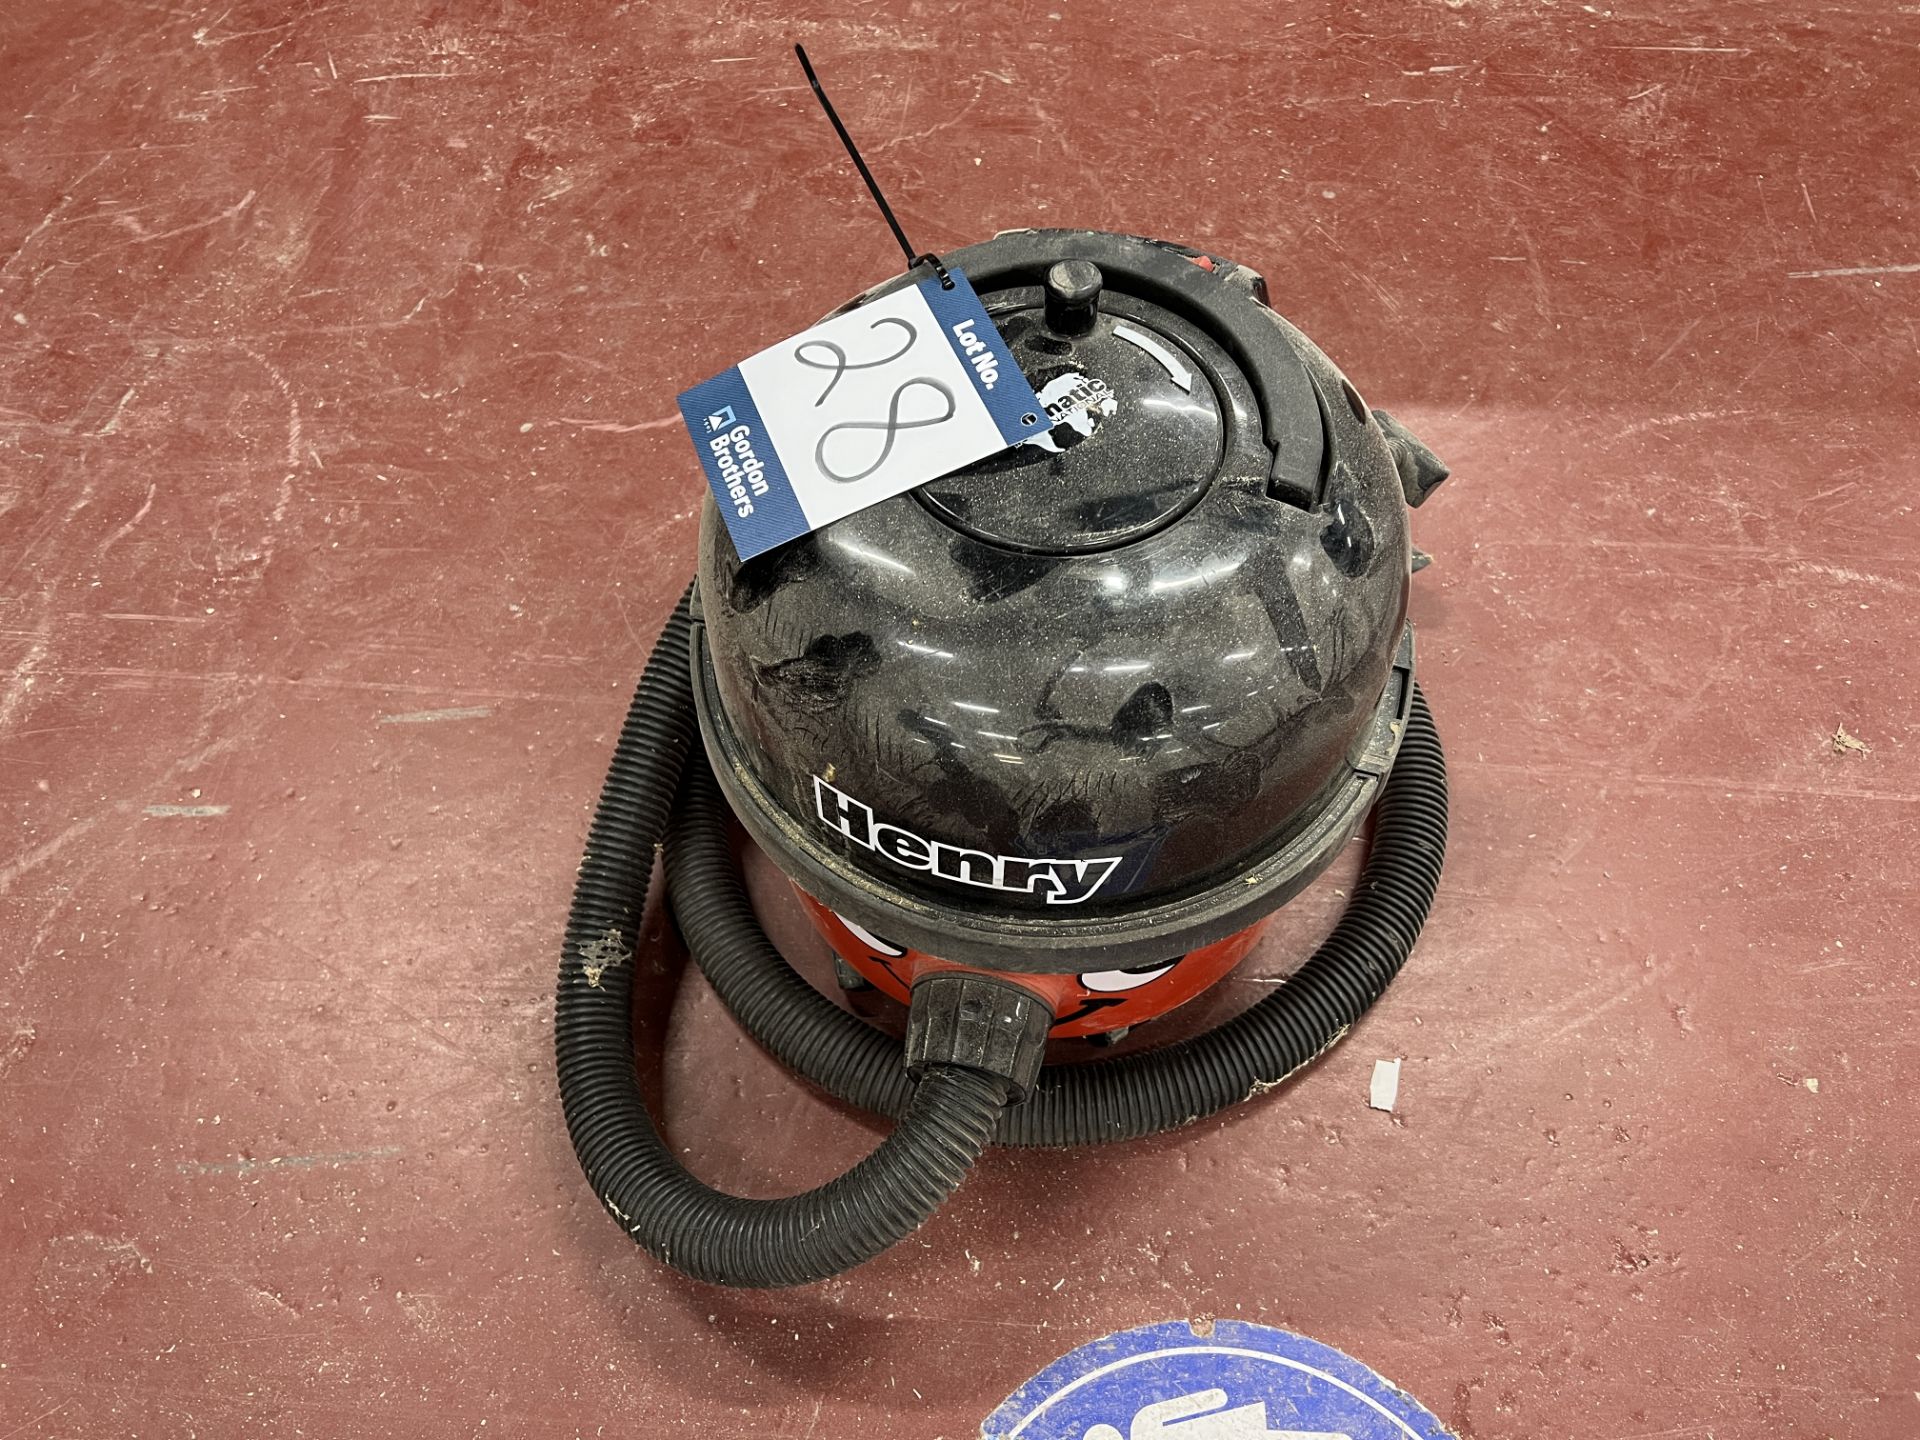 Henry Unmatic vacuum Cleaner with Lo/Hi speed settings, 230 volts, 1200w, S/No.1405294, location